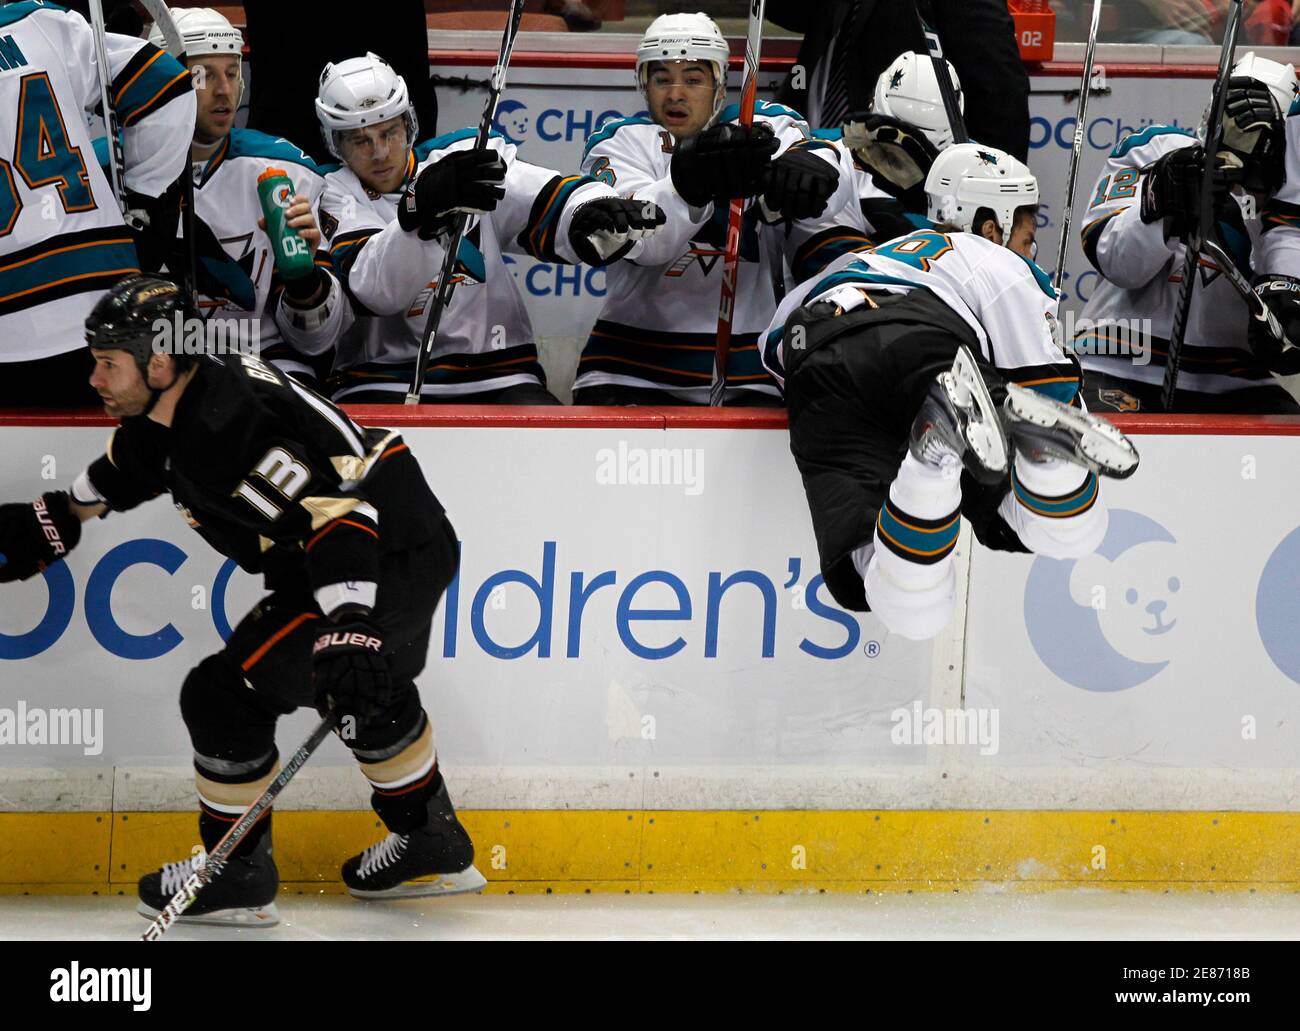 Anaheim Ducks right wing Mike Brown hits San Jose Sharks defenseman Jay Leach into the boards during the first period of their NHL hockey game in Anaheim, California March 14, 2010.  REUTERS/Mike Blake  (UNITED STATES - Tags: SPORT ICE HOCKEY) Stock Photo